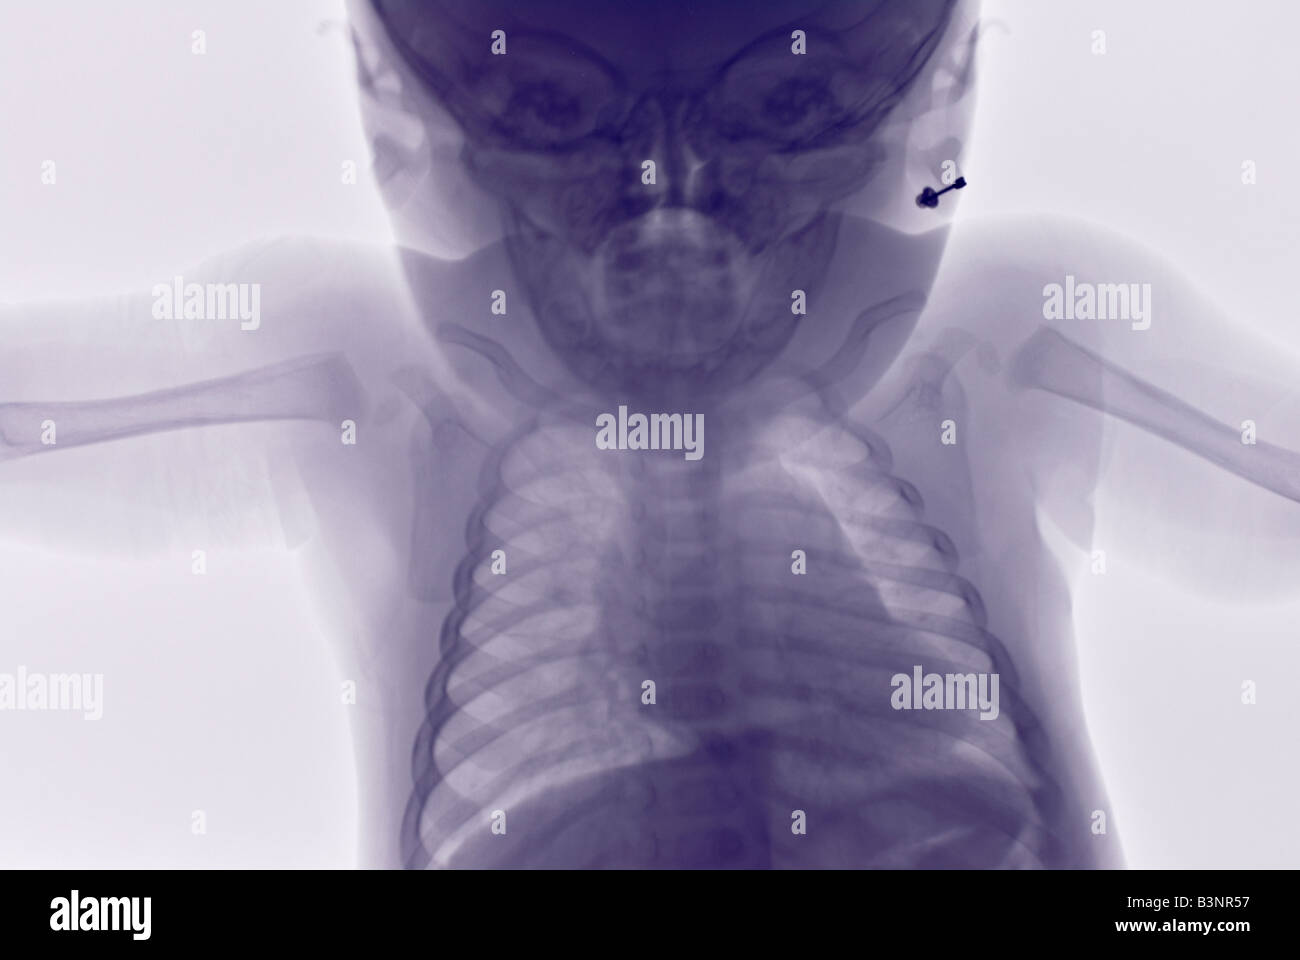 xray of the upper body of a 6 month old child suspected of having been physically abused Stock Photo